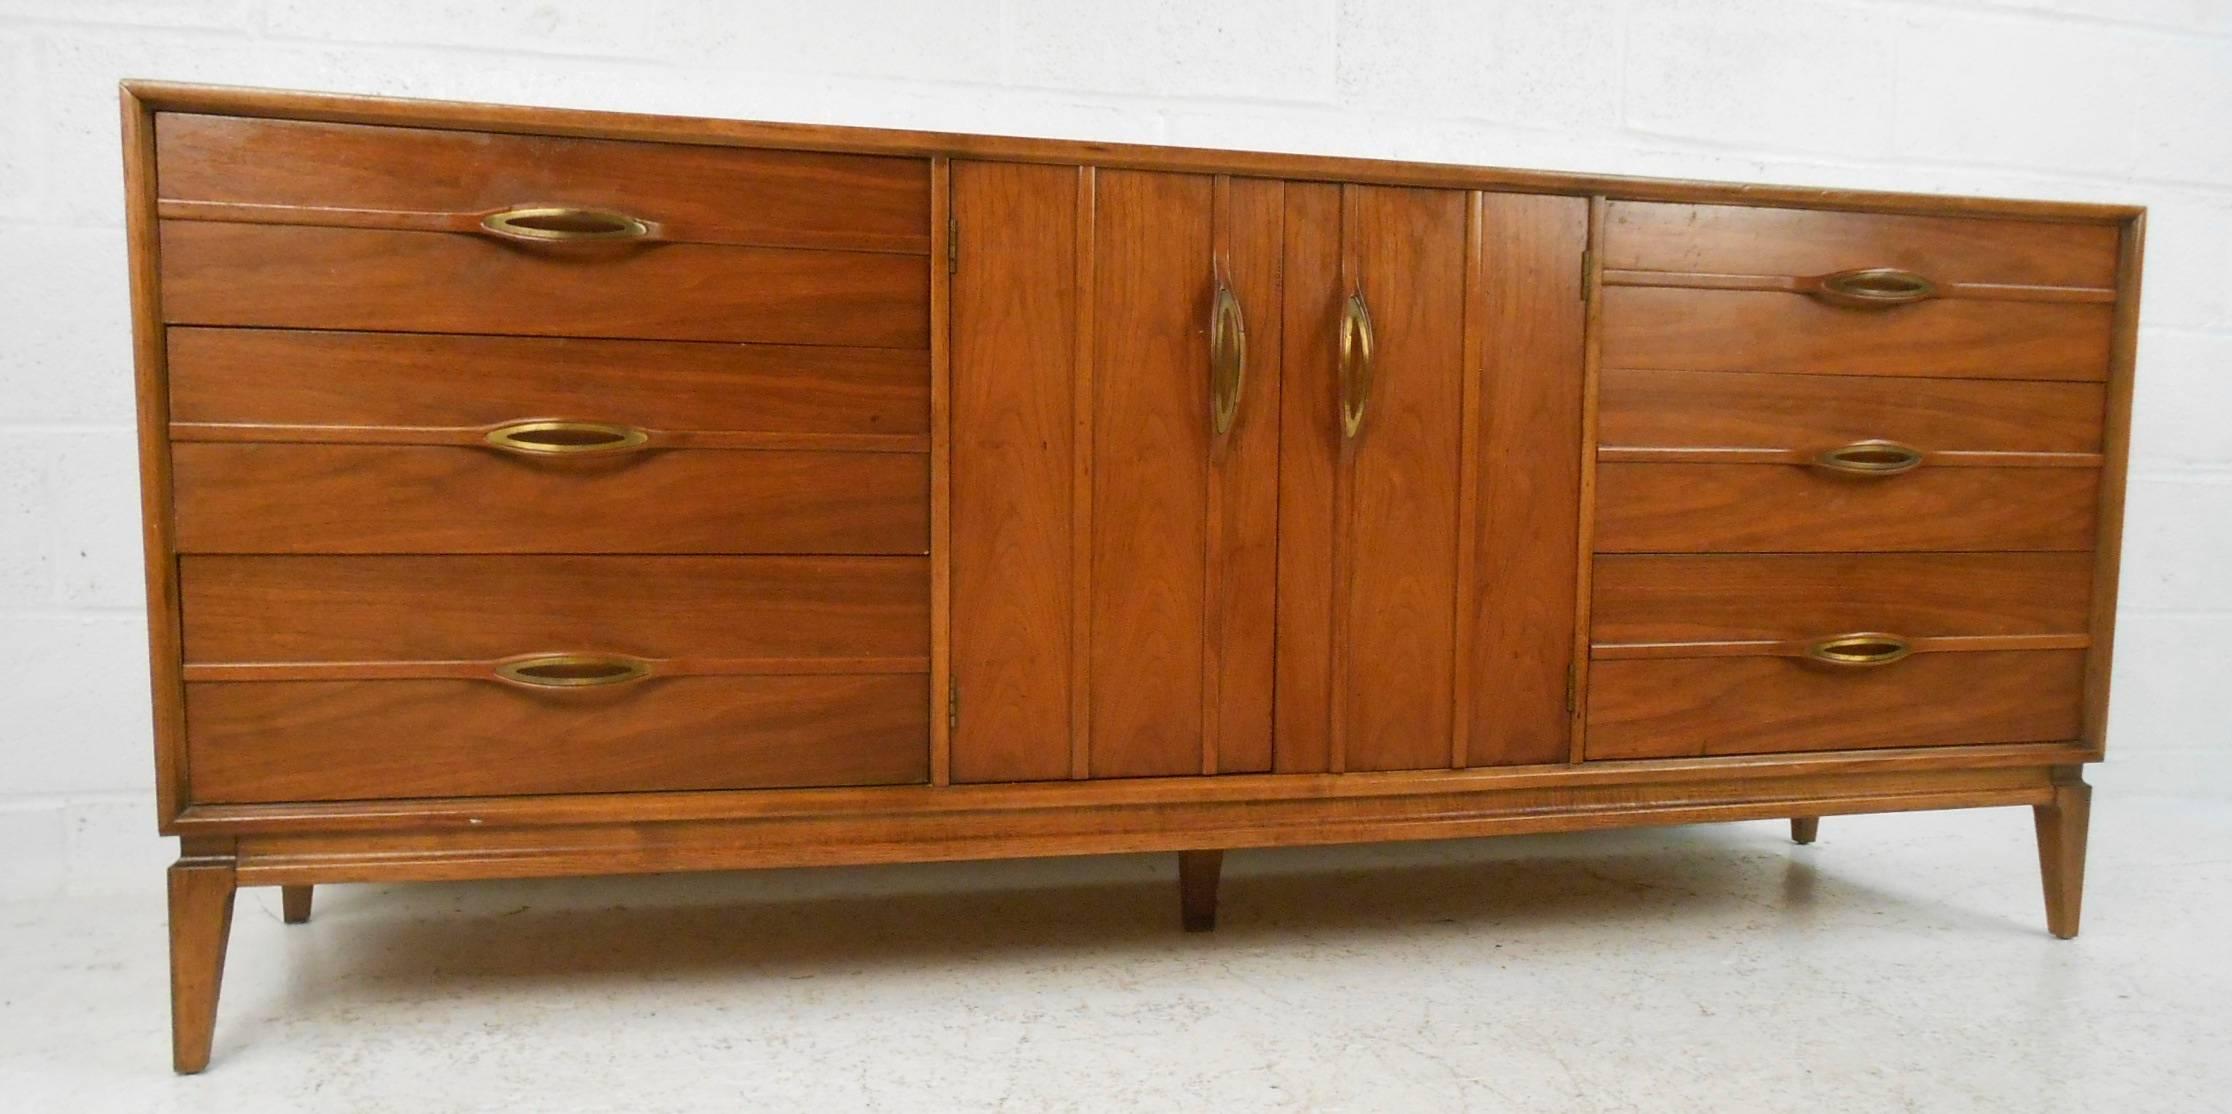 This gorgeous vintage modern dresser features unusual sculpted pulls on each drawer and cabinet. Sleek design provides plenty of room for storage within its nine hefty drawers. Sturdy construction with stunning walnut wood grain and splayed legs.